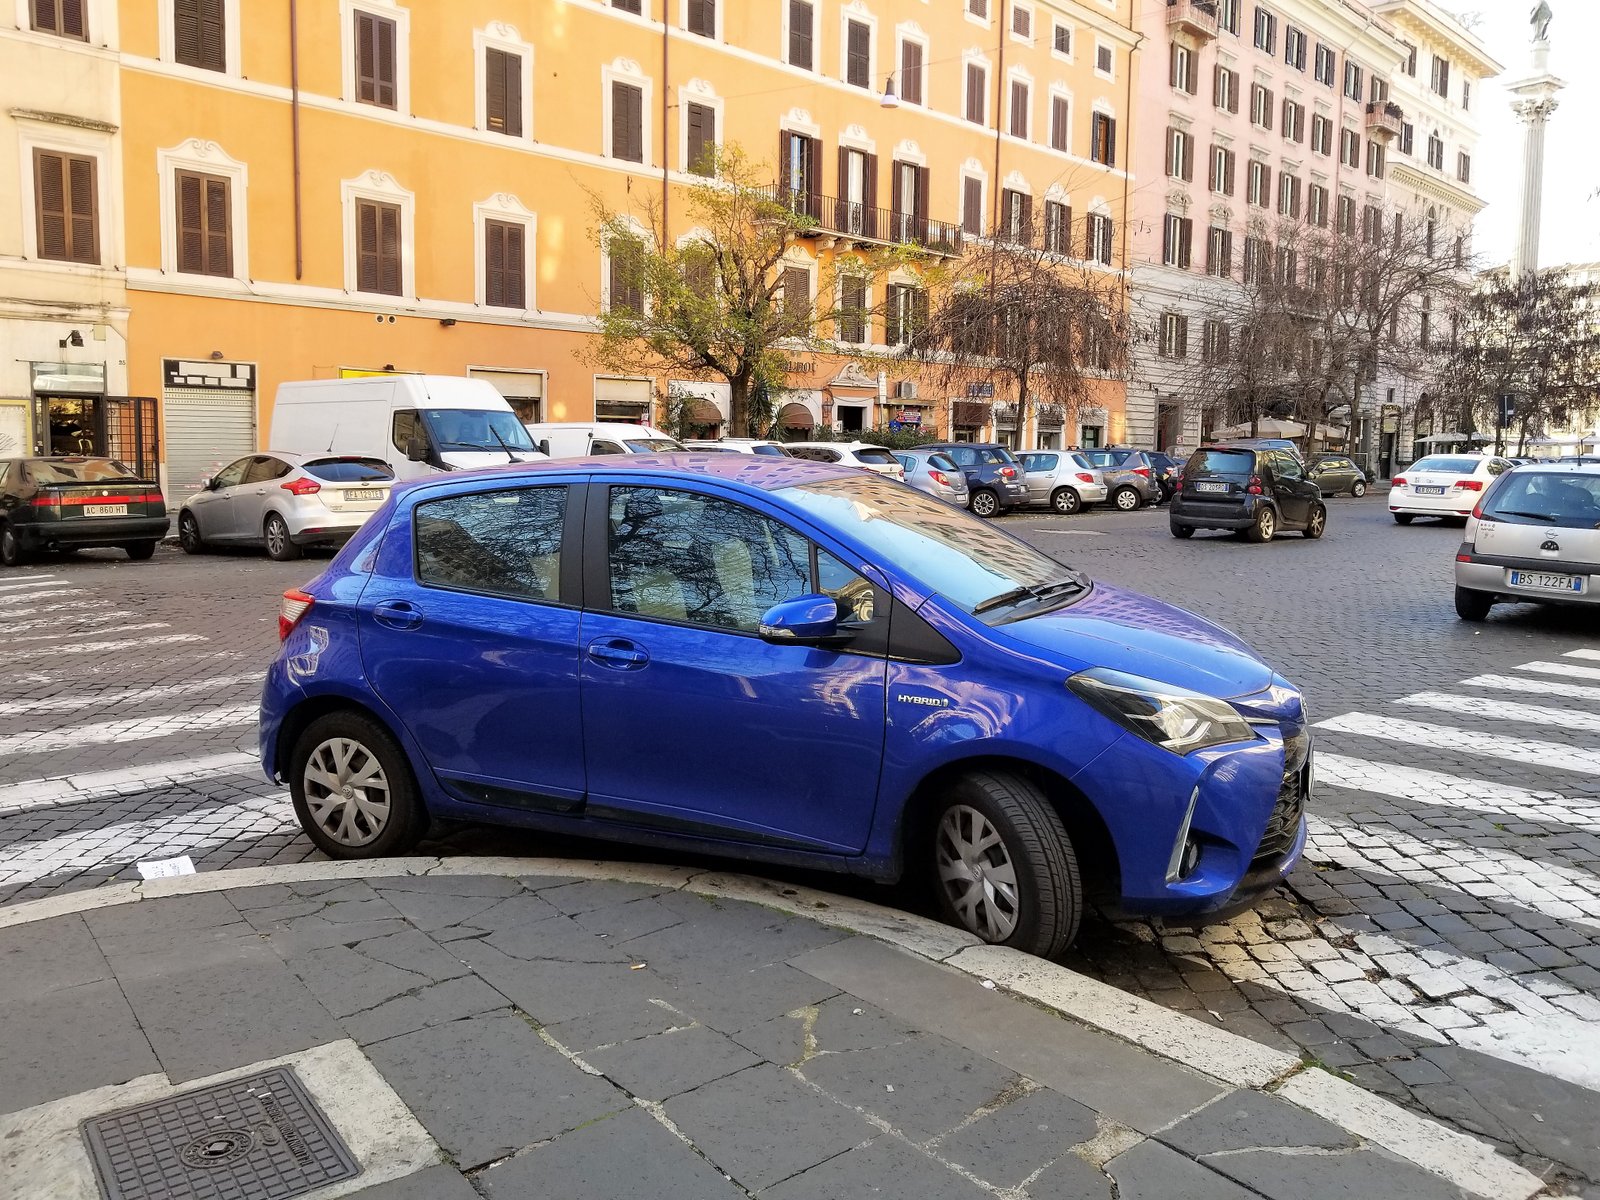 parking in Rome, Italy. ouritalianjourney.com